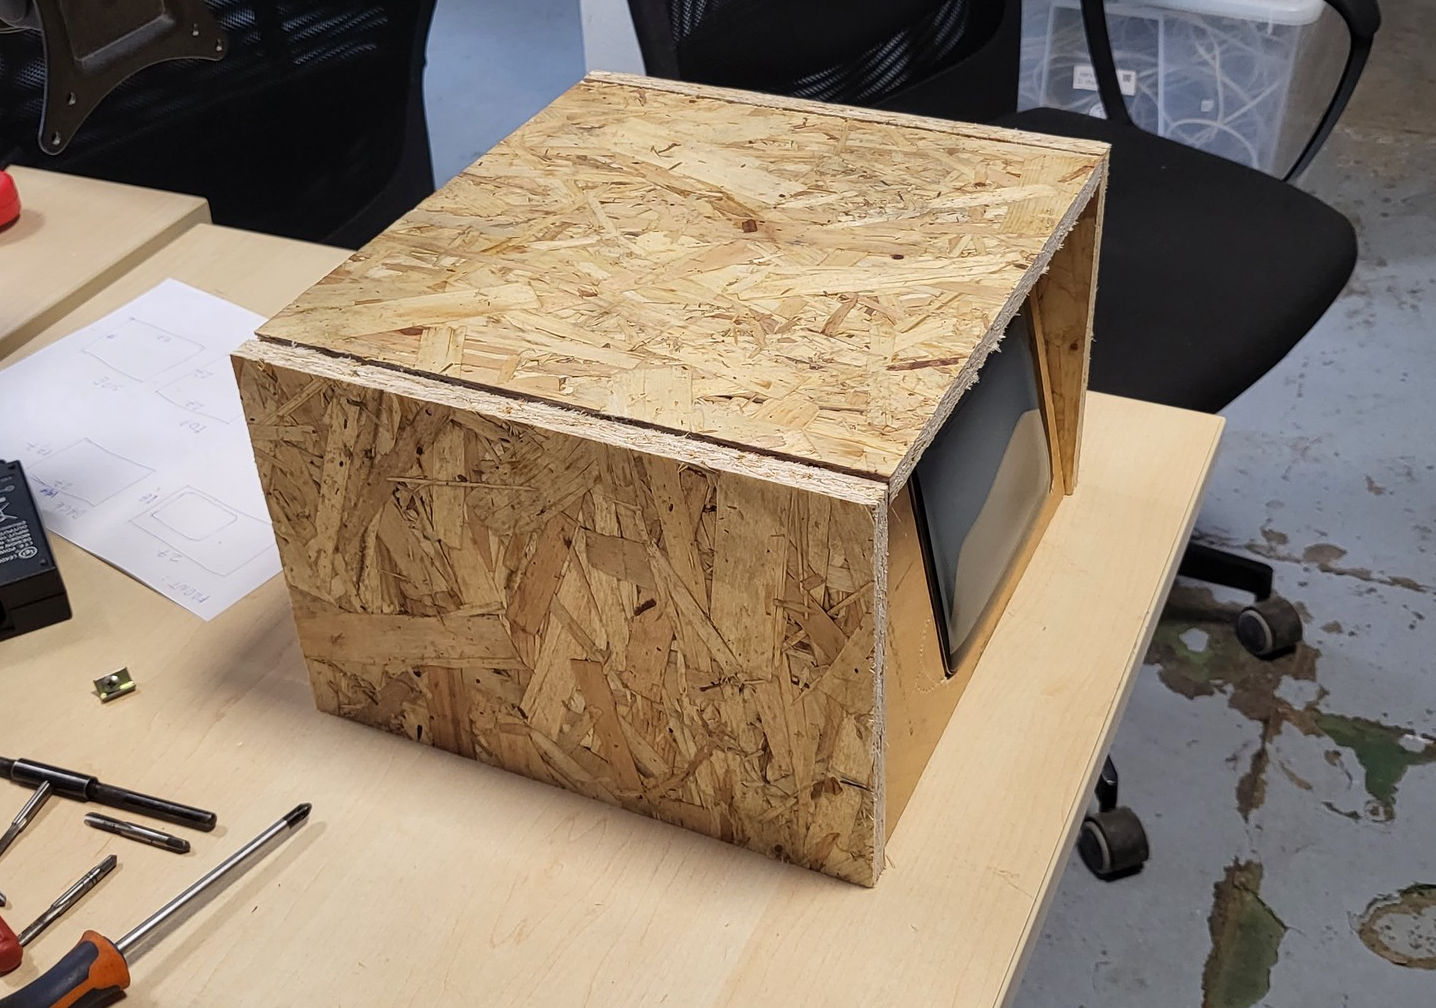 A big, square-ish box is sitting on a table; on one side, it has an indent and a cutout for a CRT.